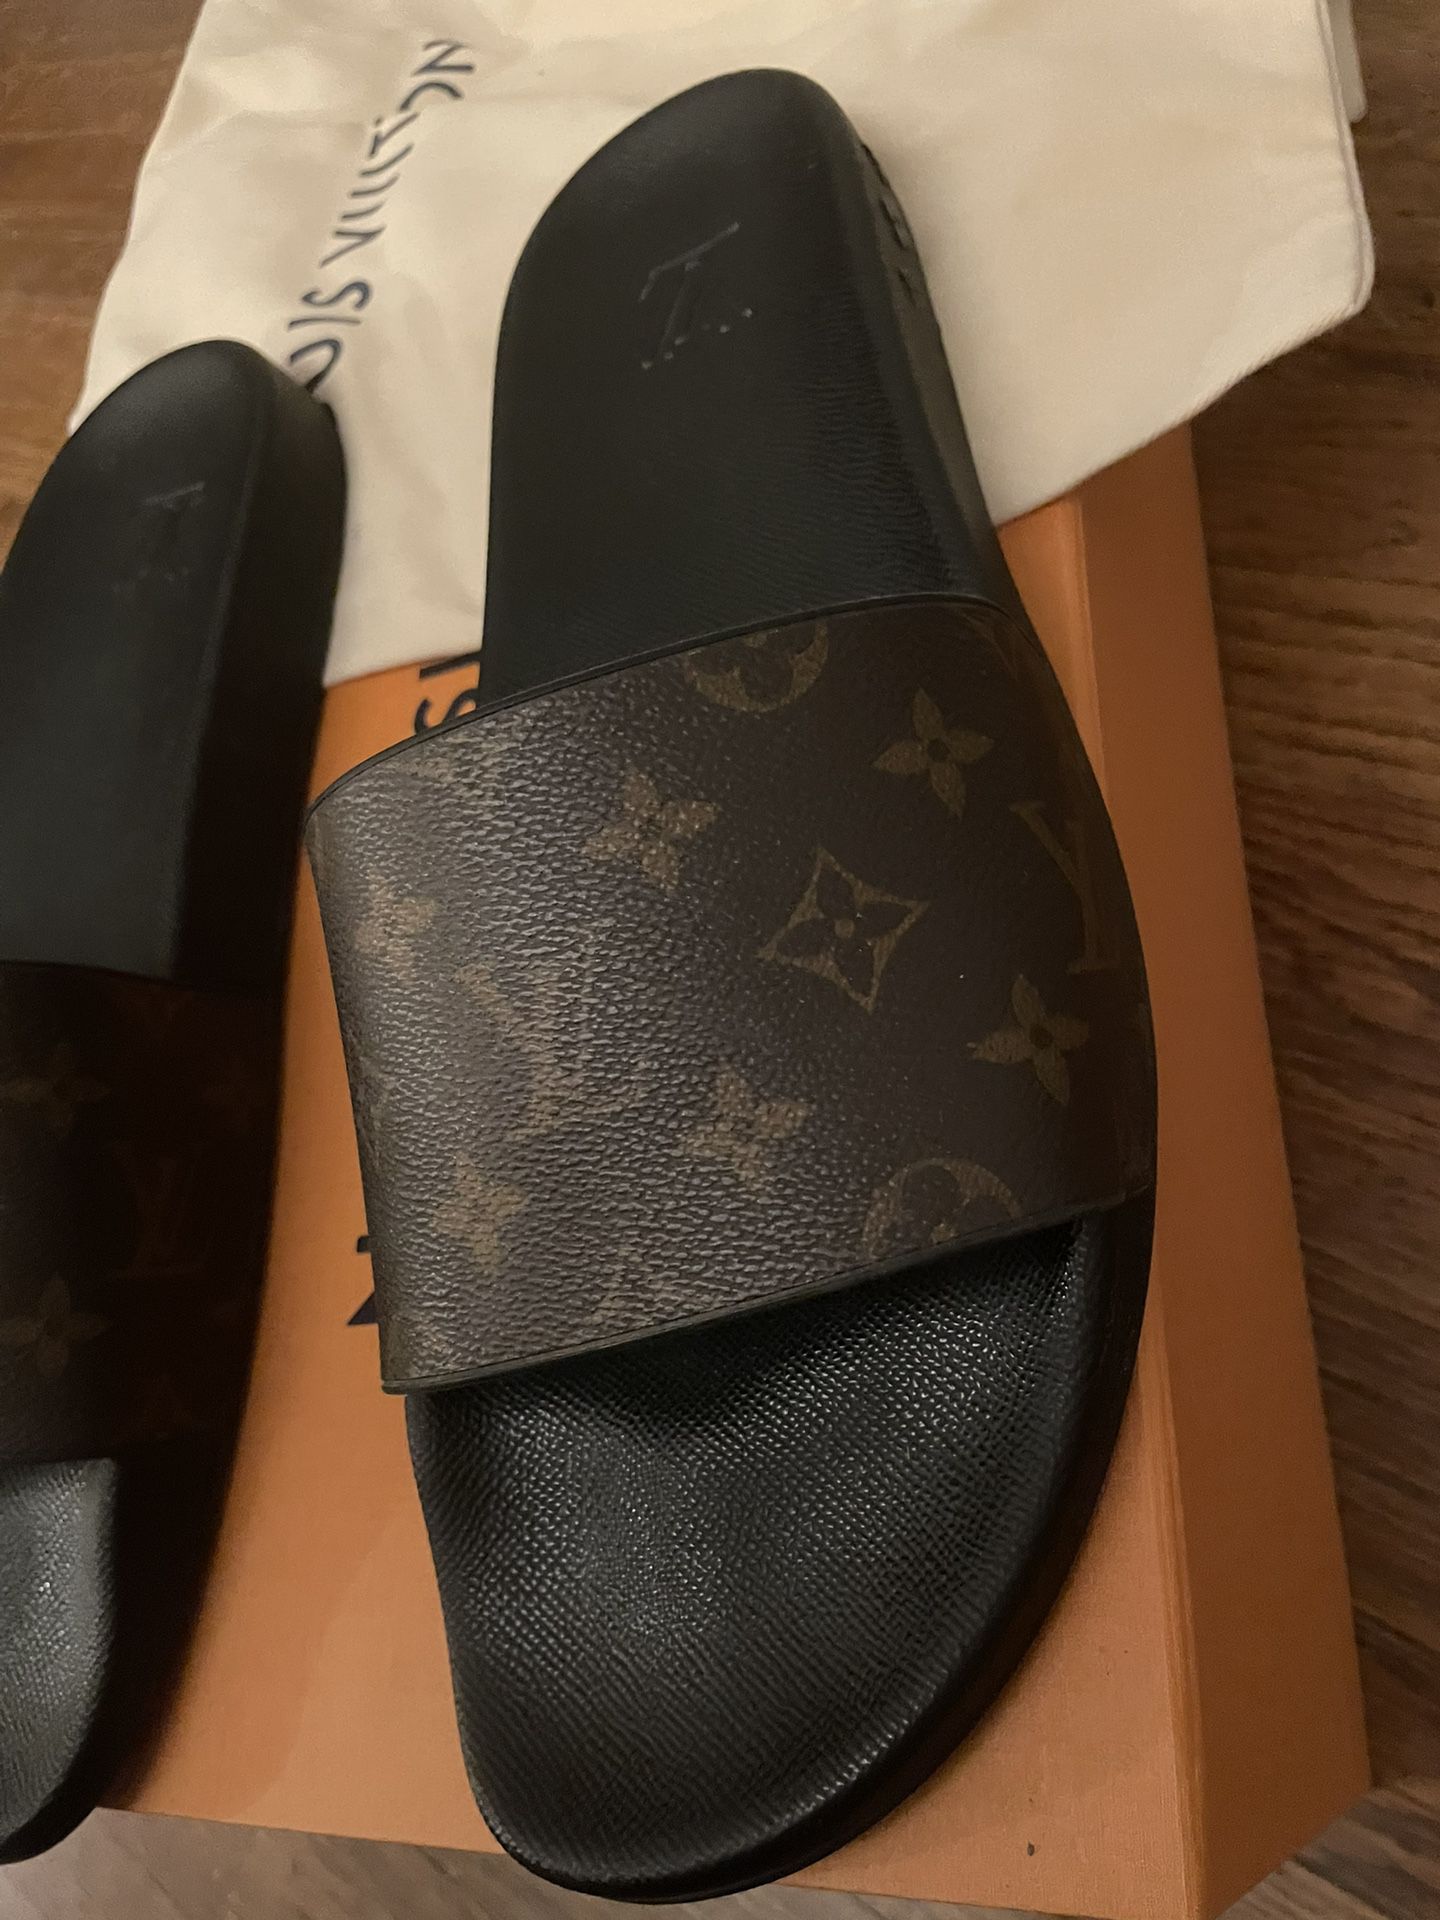 Louis Vuitton Size 14 - 1A3YCQ Waterfront Mules - Sandals for Sale in San  Antonio, TX - OfferUp